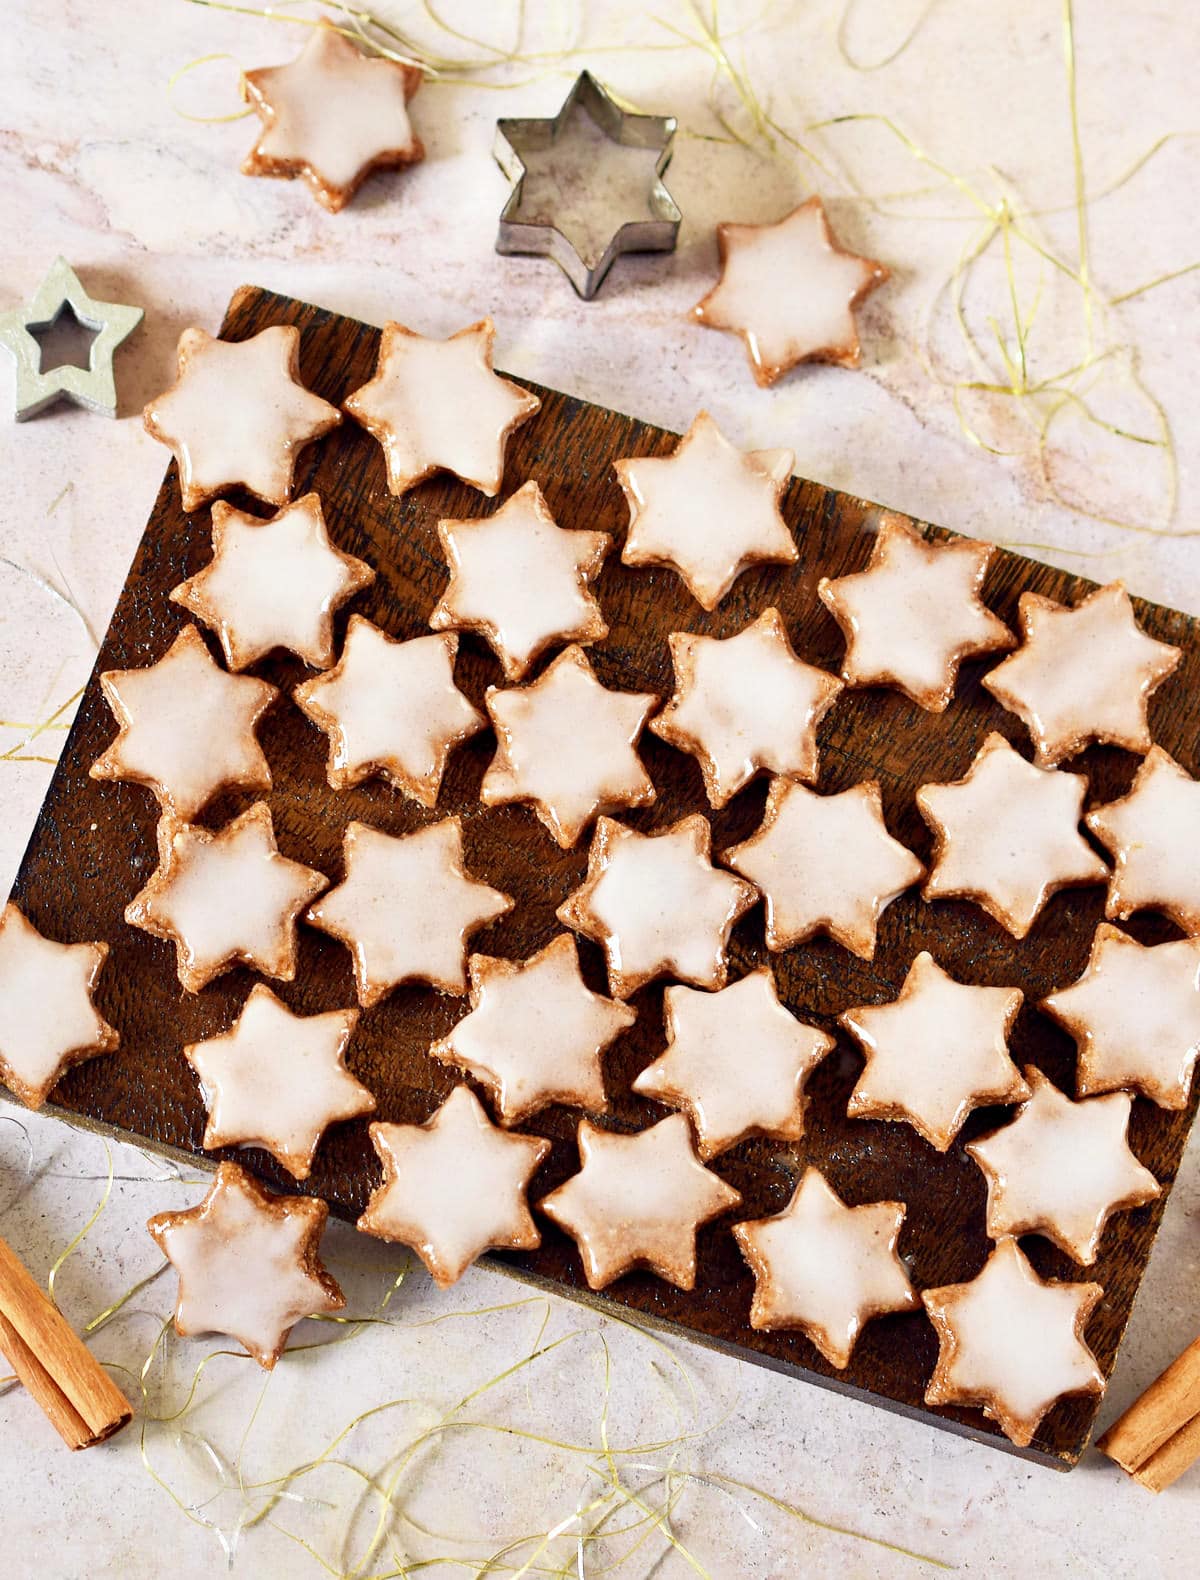 Star-shaped vegan cookies on a wooden board.